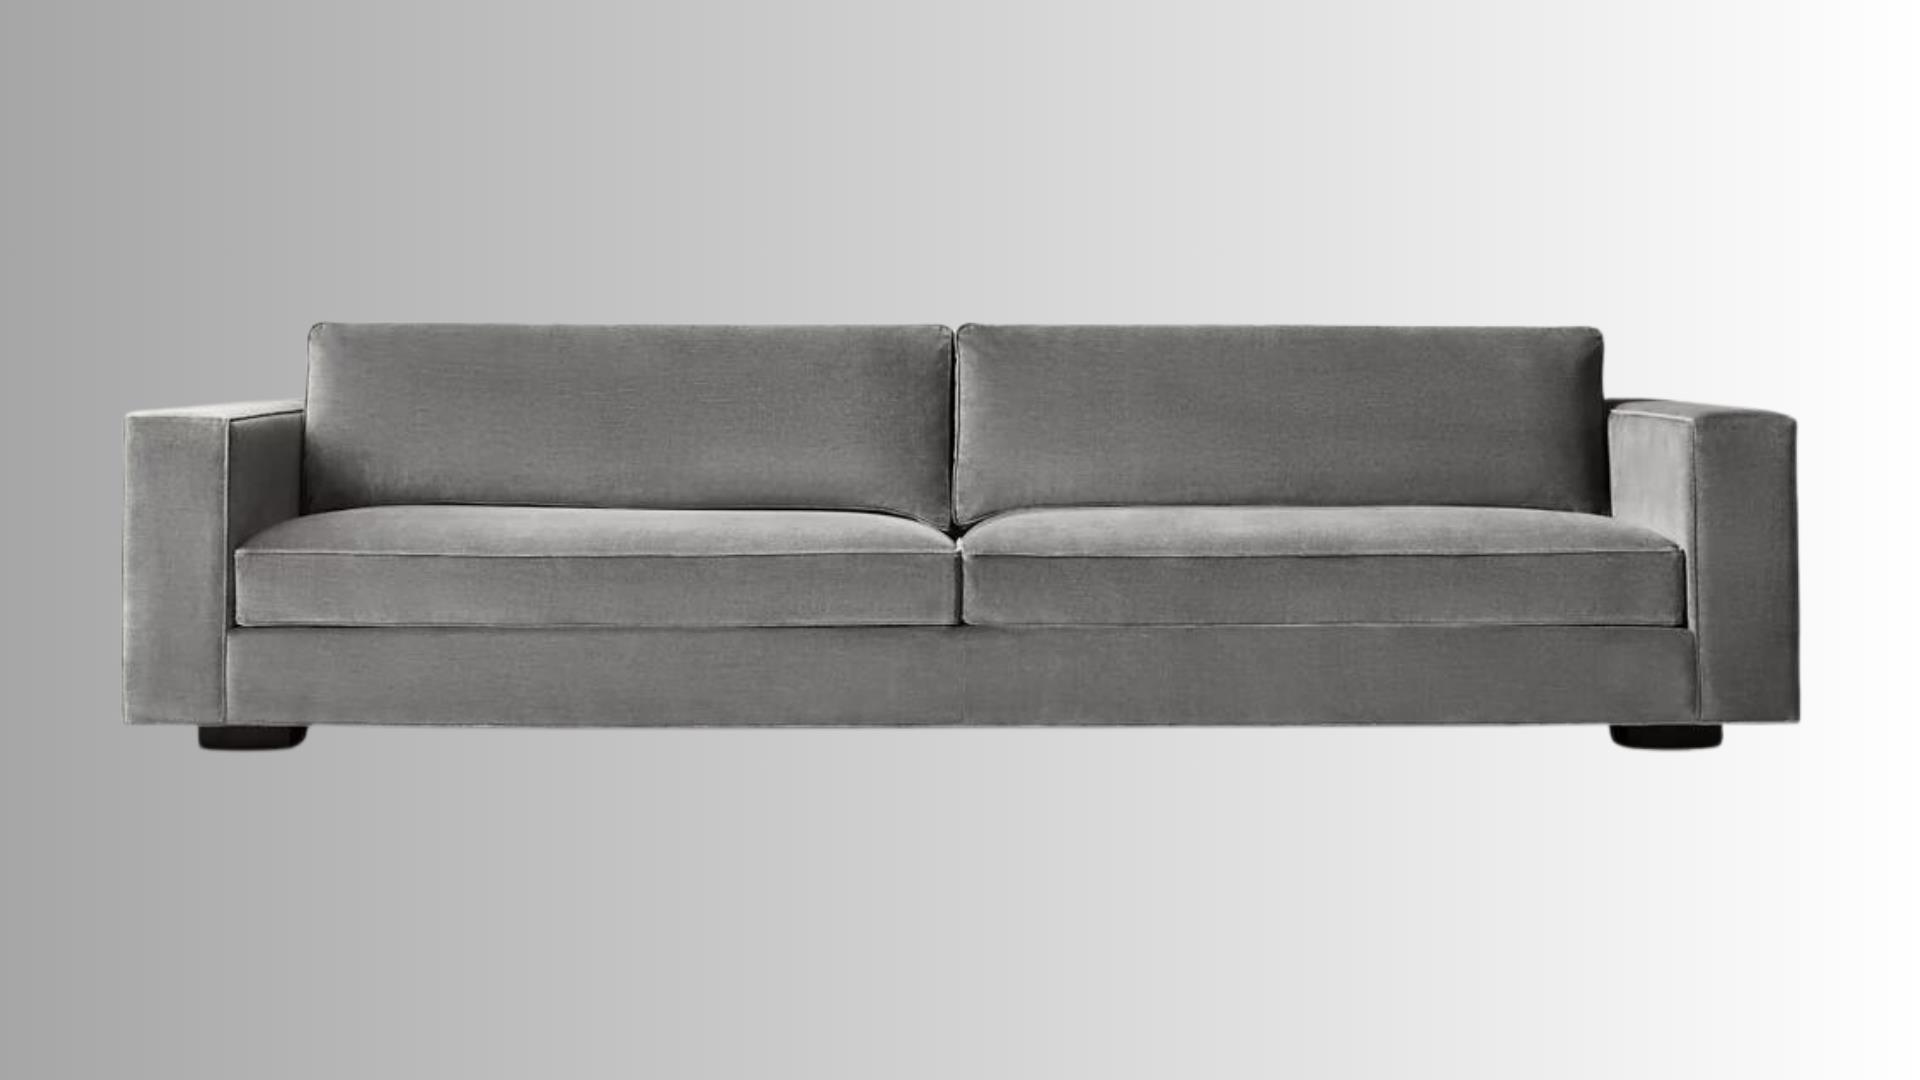 Cutler Sofa- A Timeless Elegance for Your Home